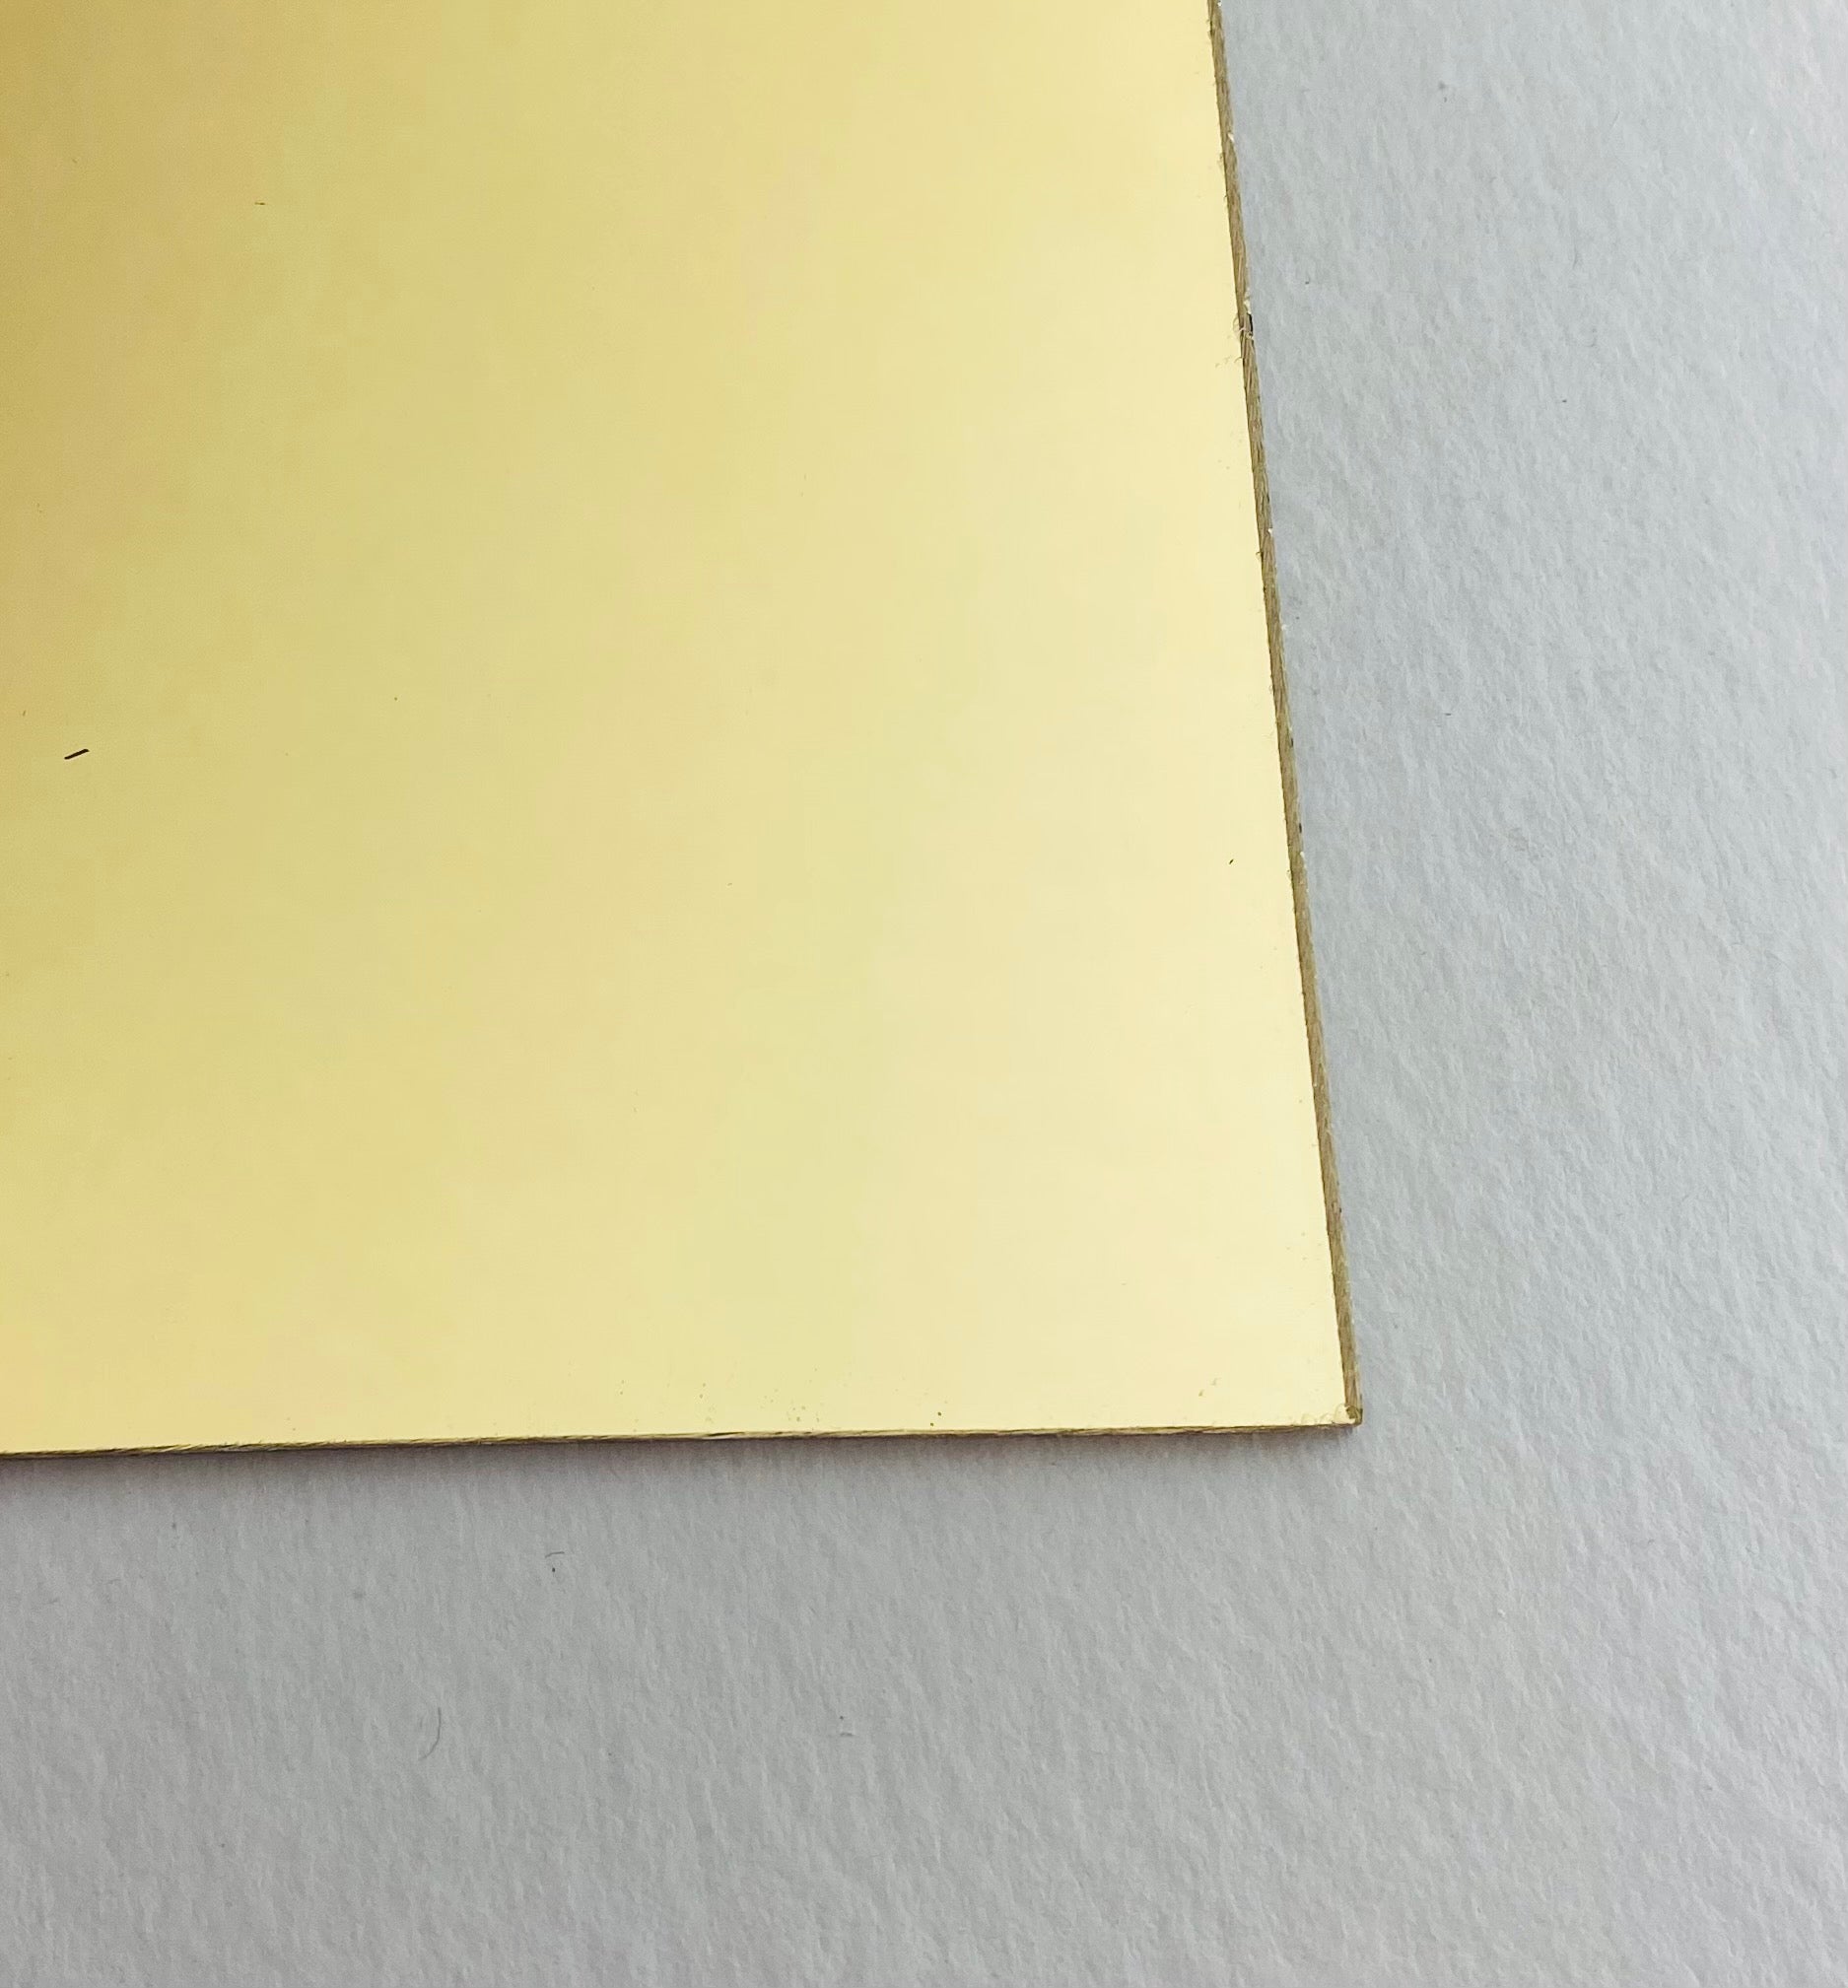 Mirrored Gold Acrylic Sheets for Laser Cutting & Engraving